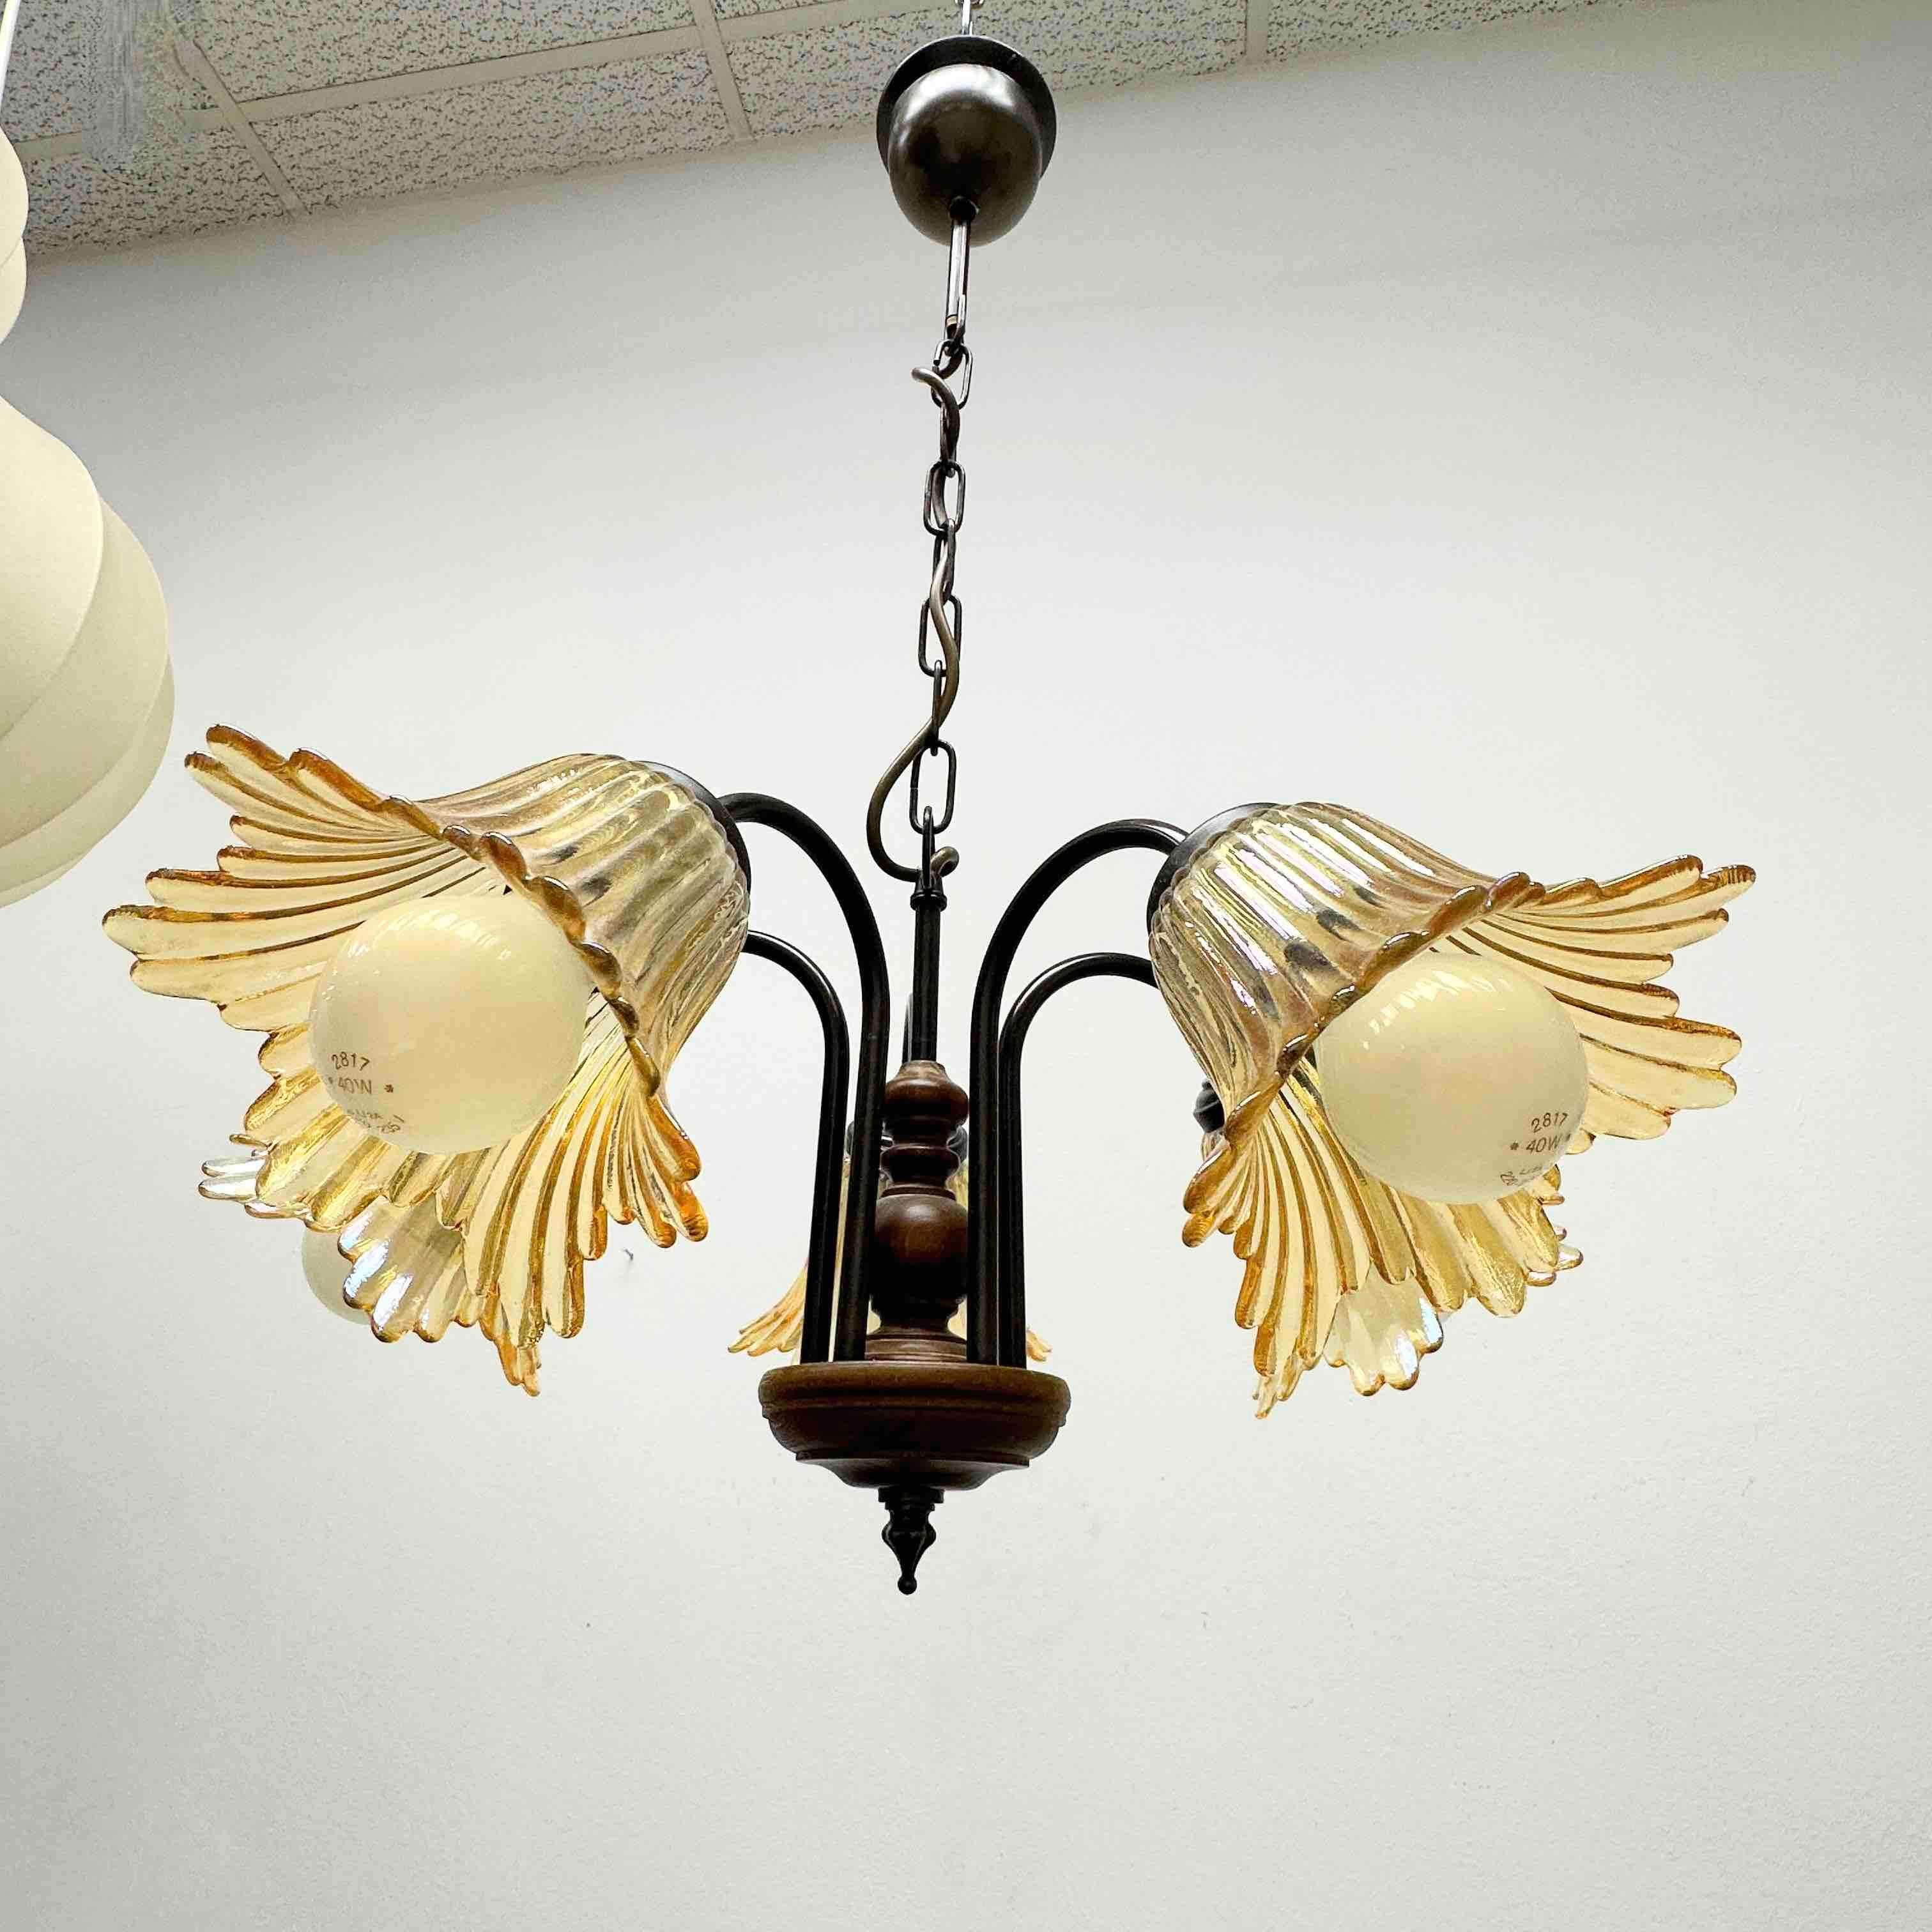 Gorgeous German Tole Wood Metal Glas Shade Five Light Chandelier, 1970s For Sale 2